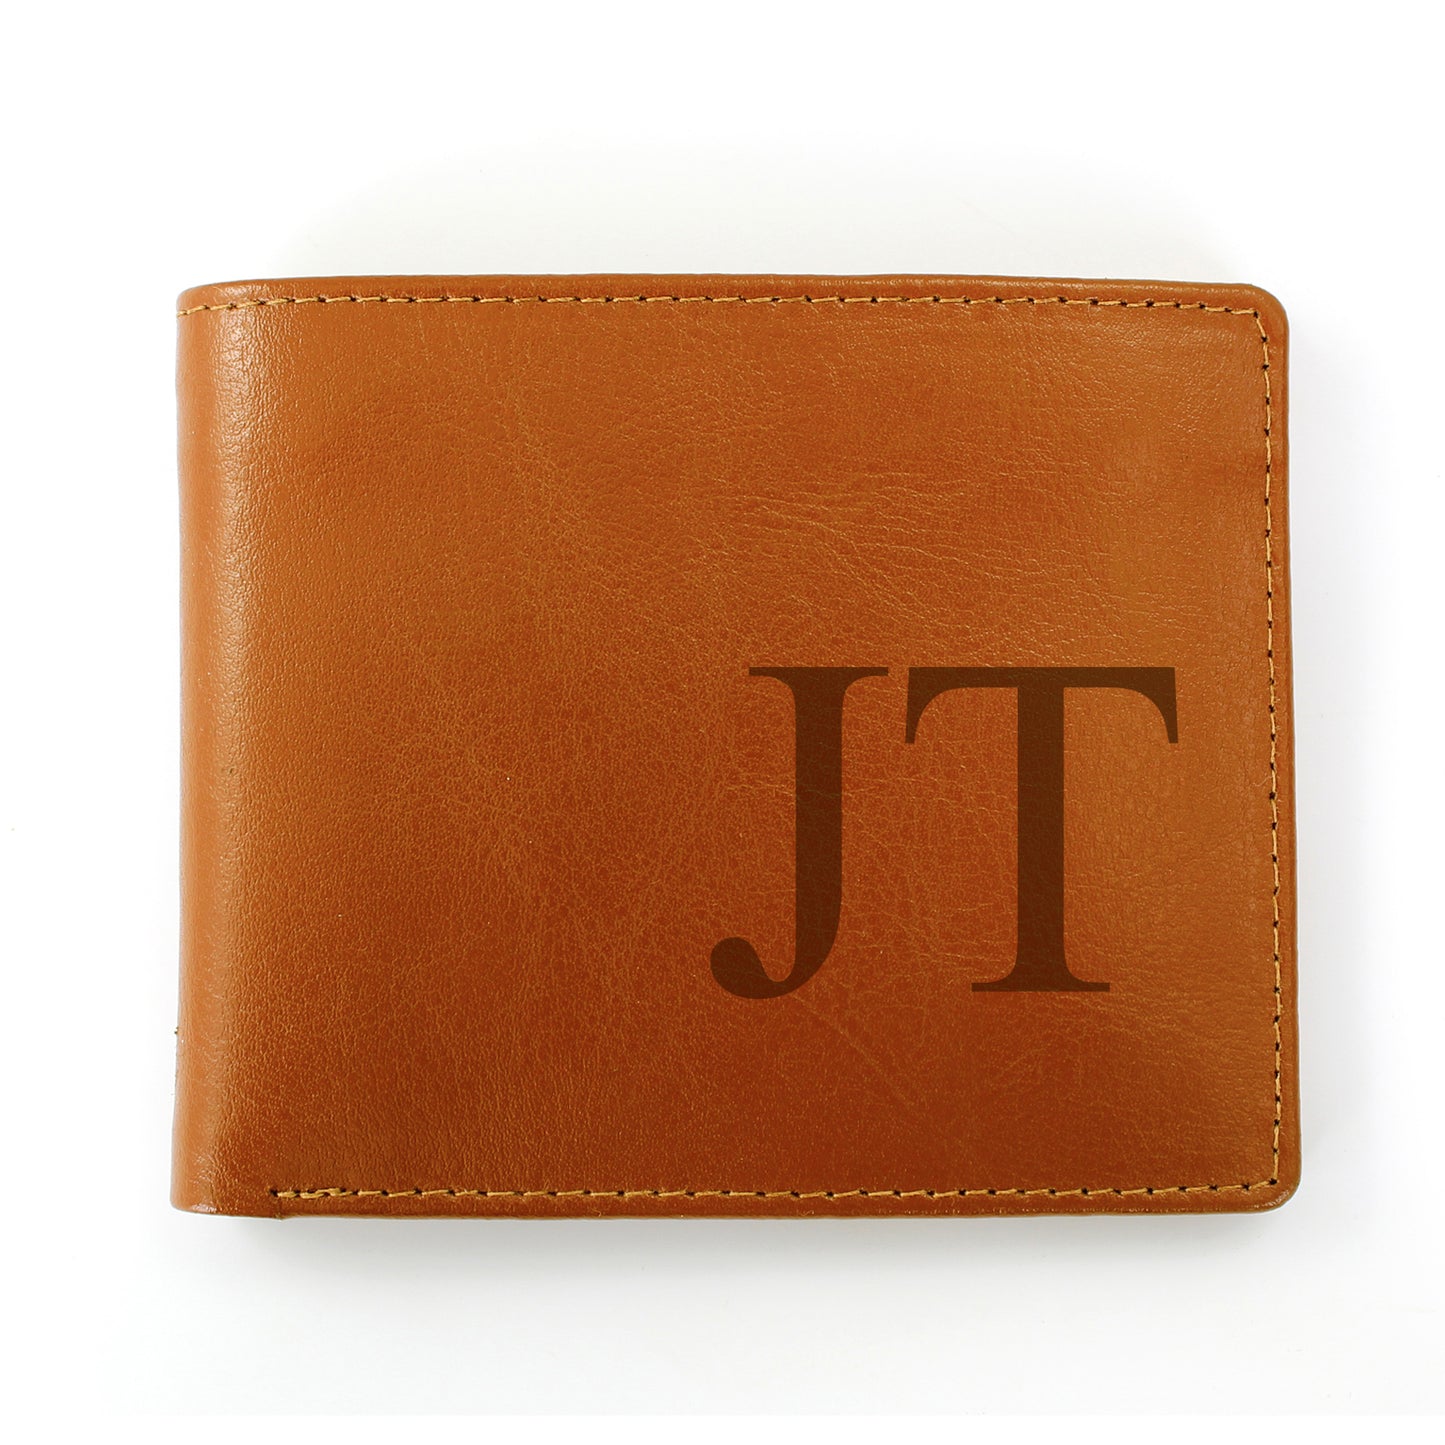 Personalised Big Initials Tan Leather Wallet - Personalise It!